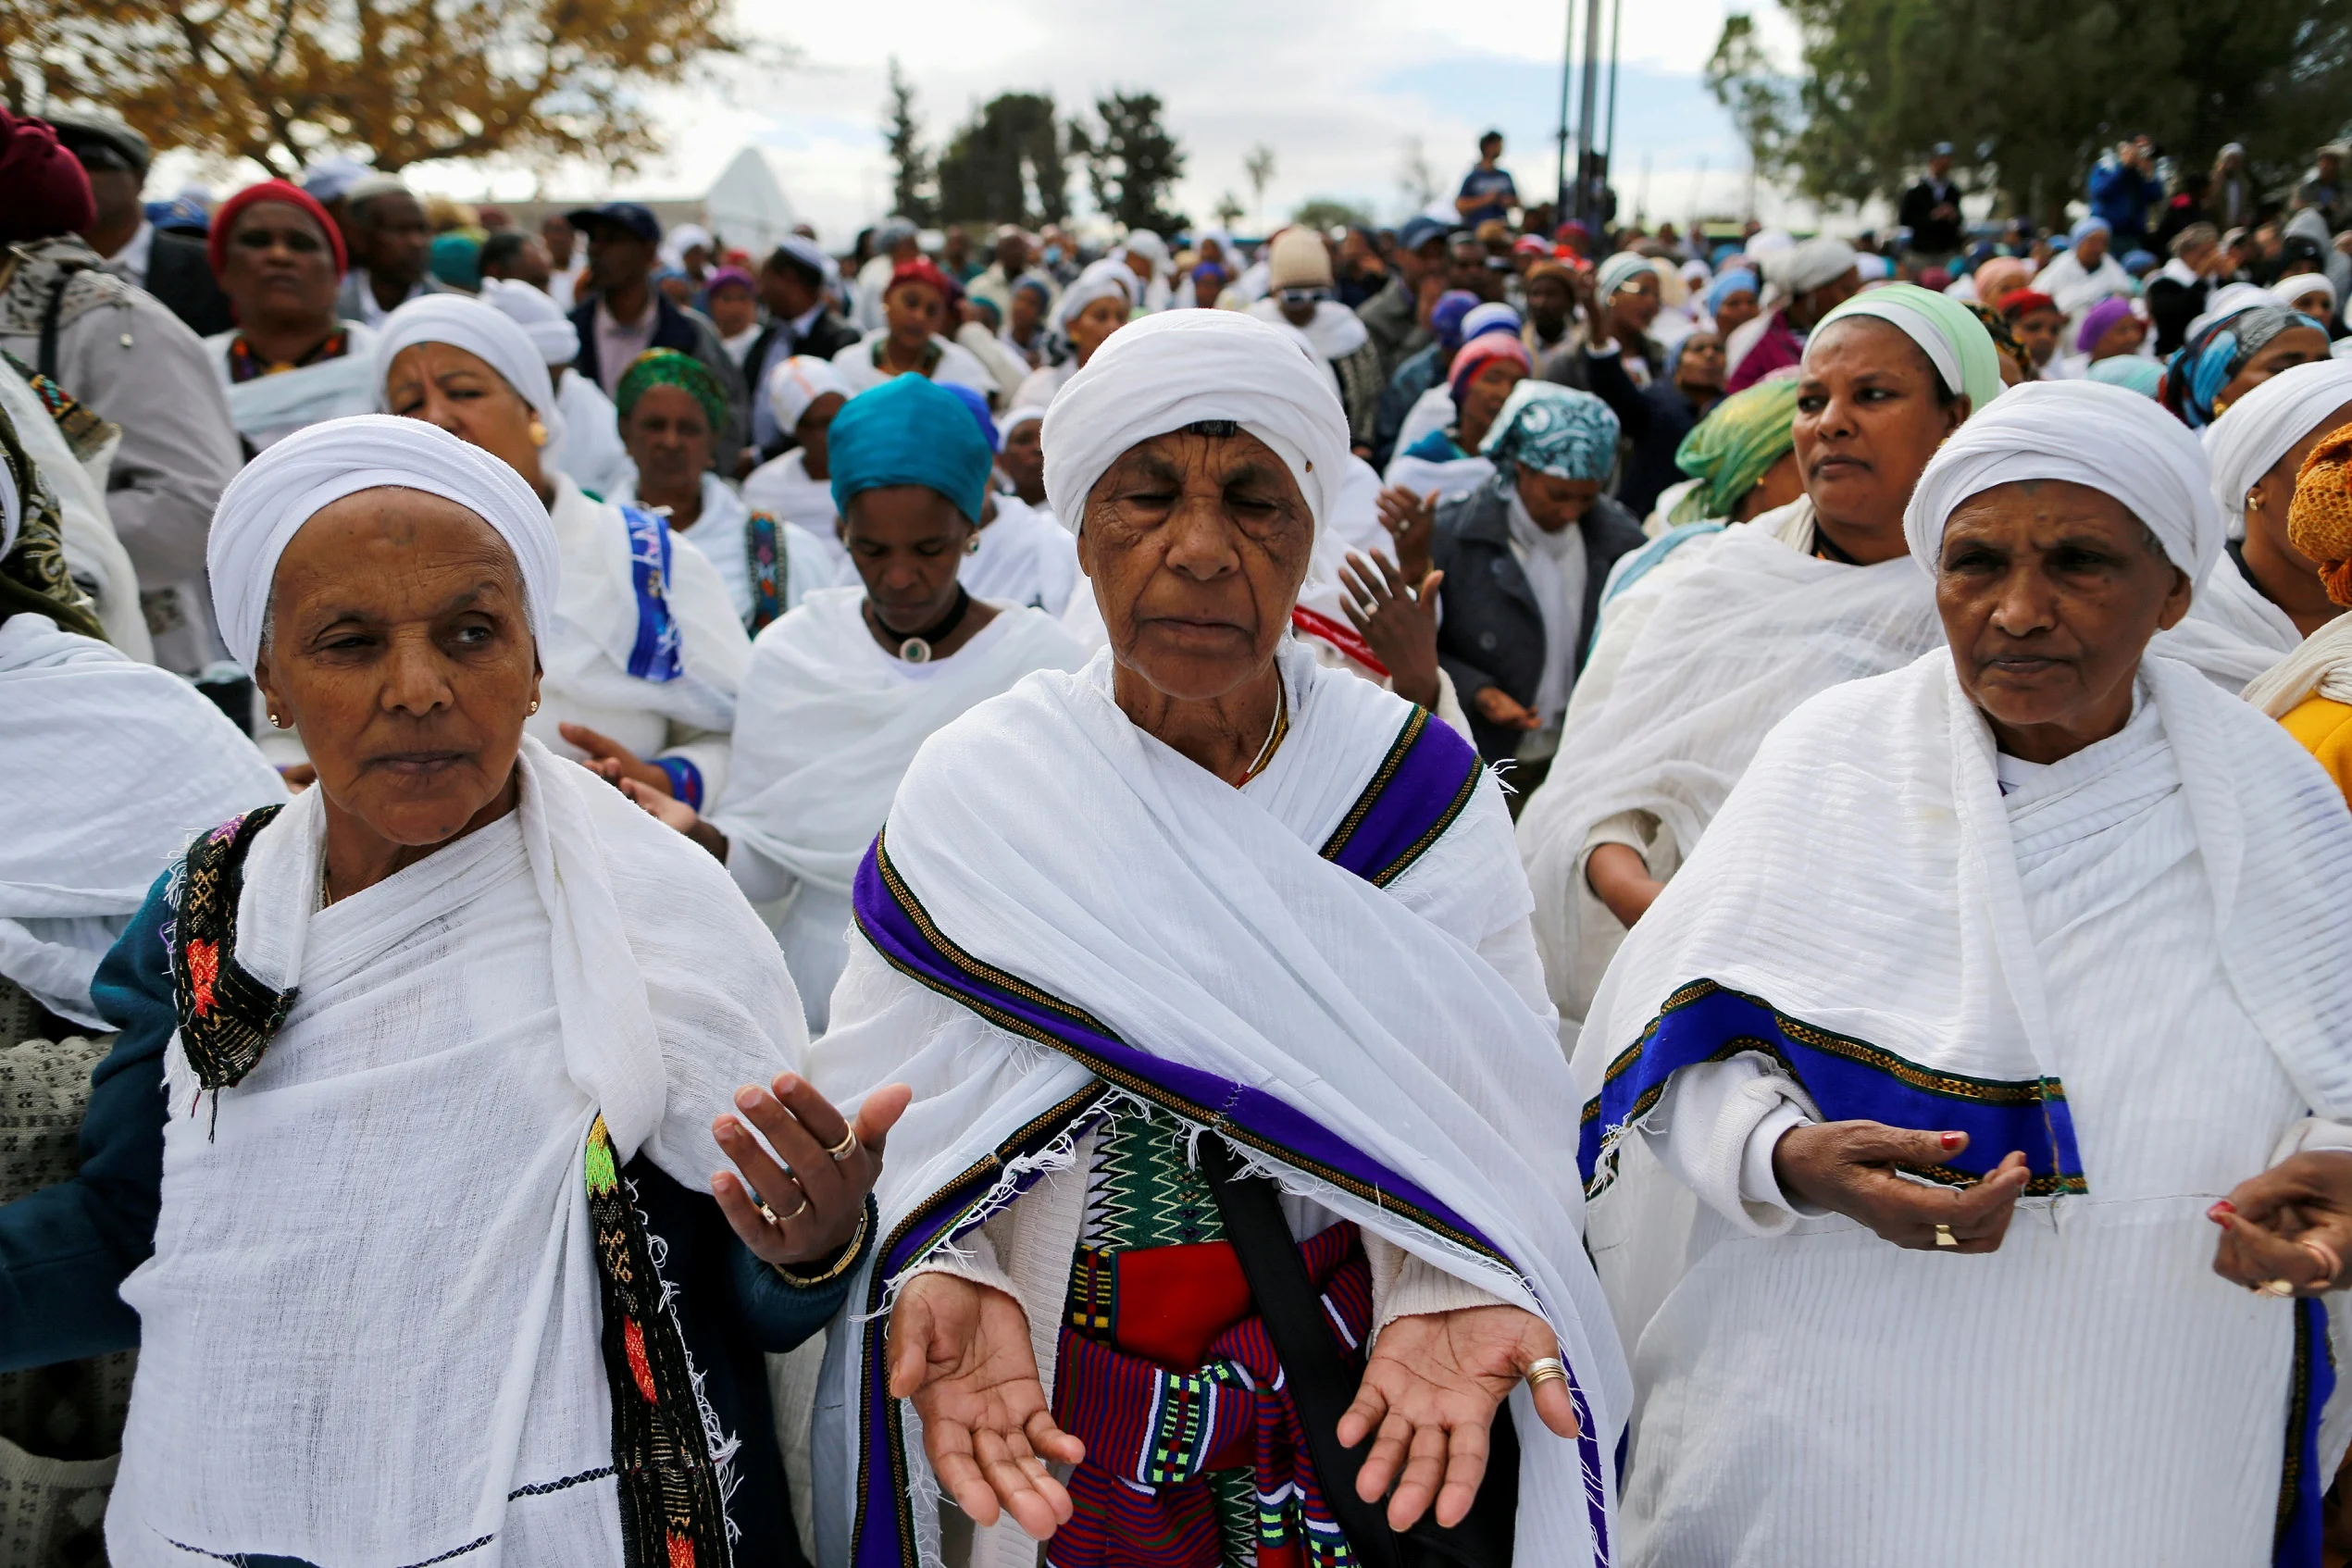 Members Of The Israeli Ethiopian Community Pray During A Ceremony Marking The Ethiopian Jewish Holiday Of Sigd In Jerusalem